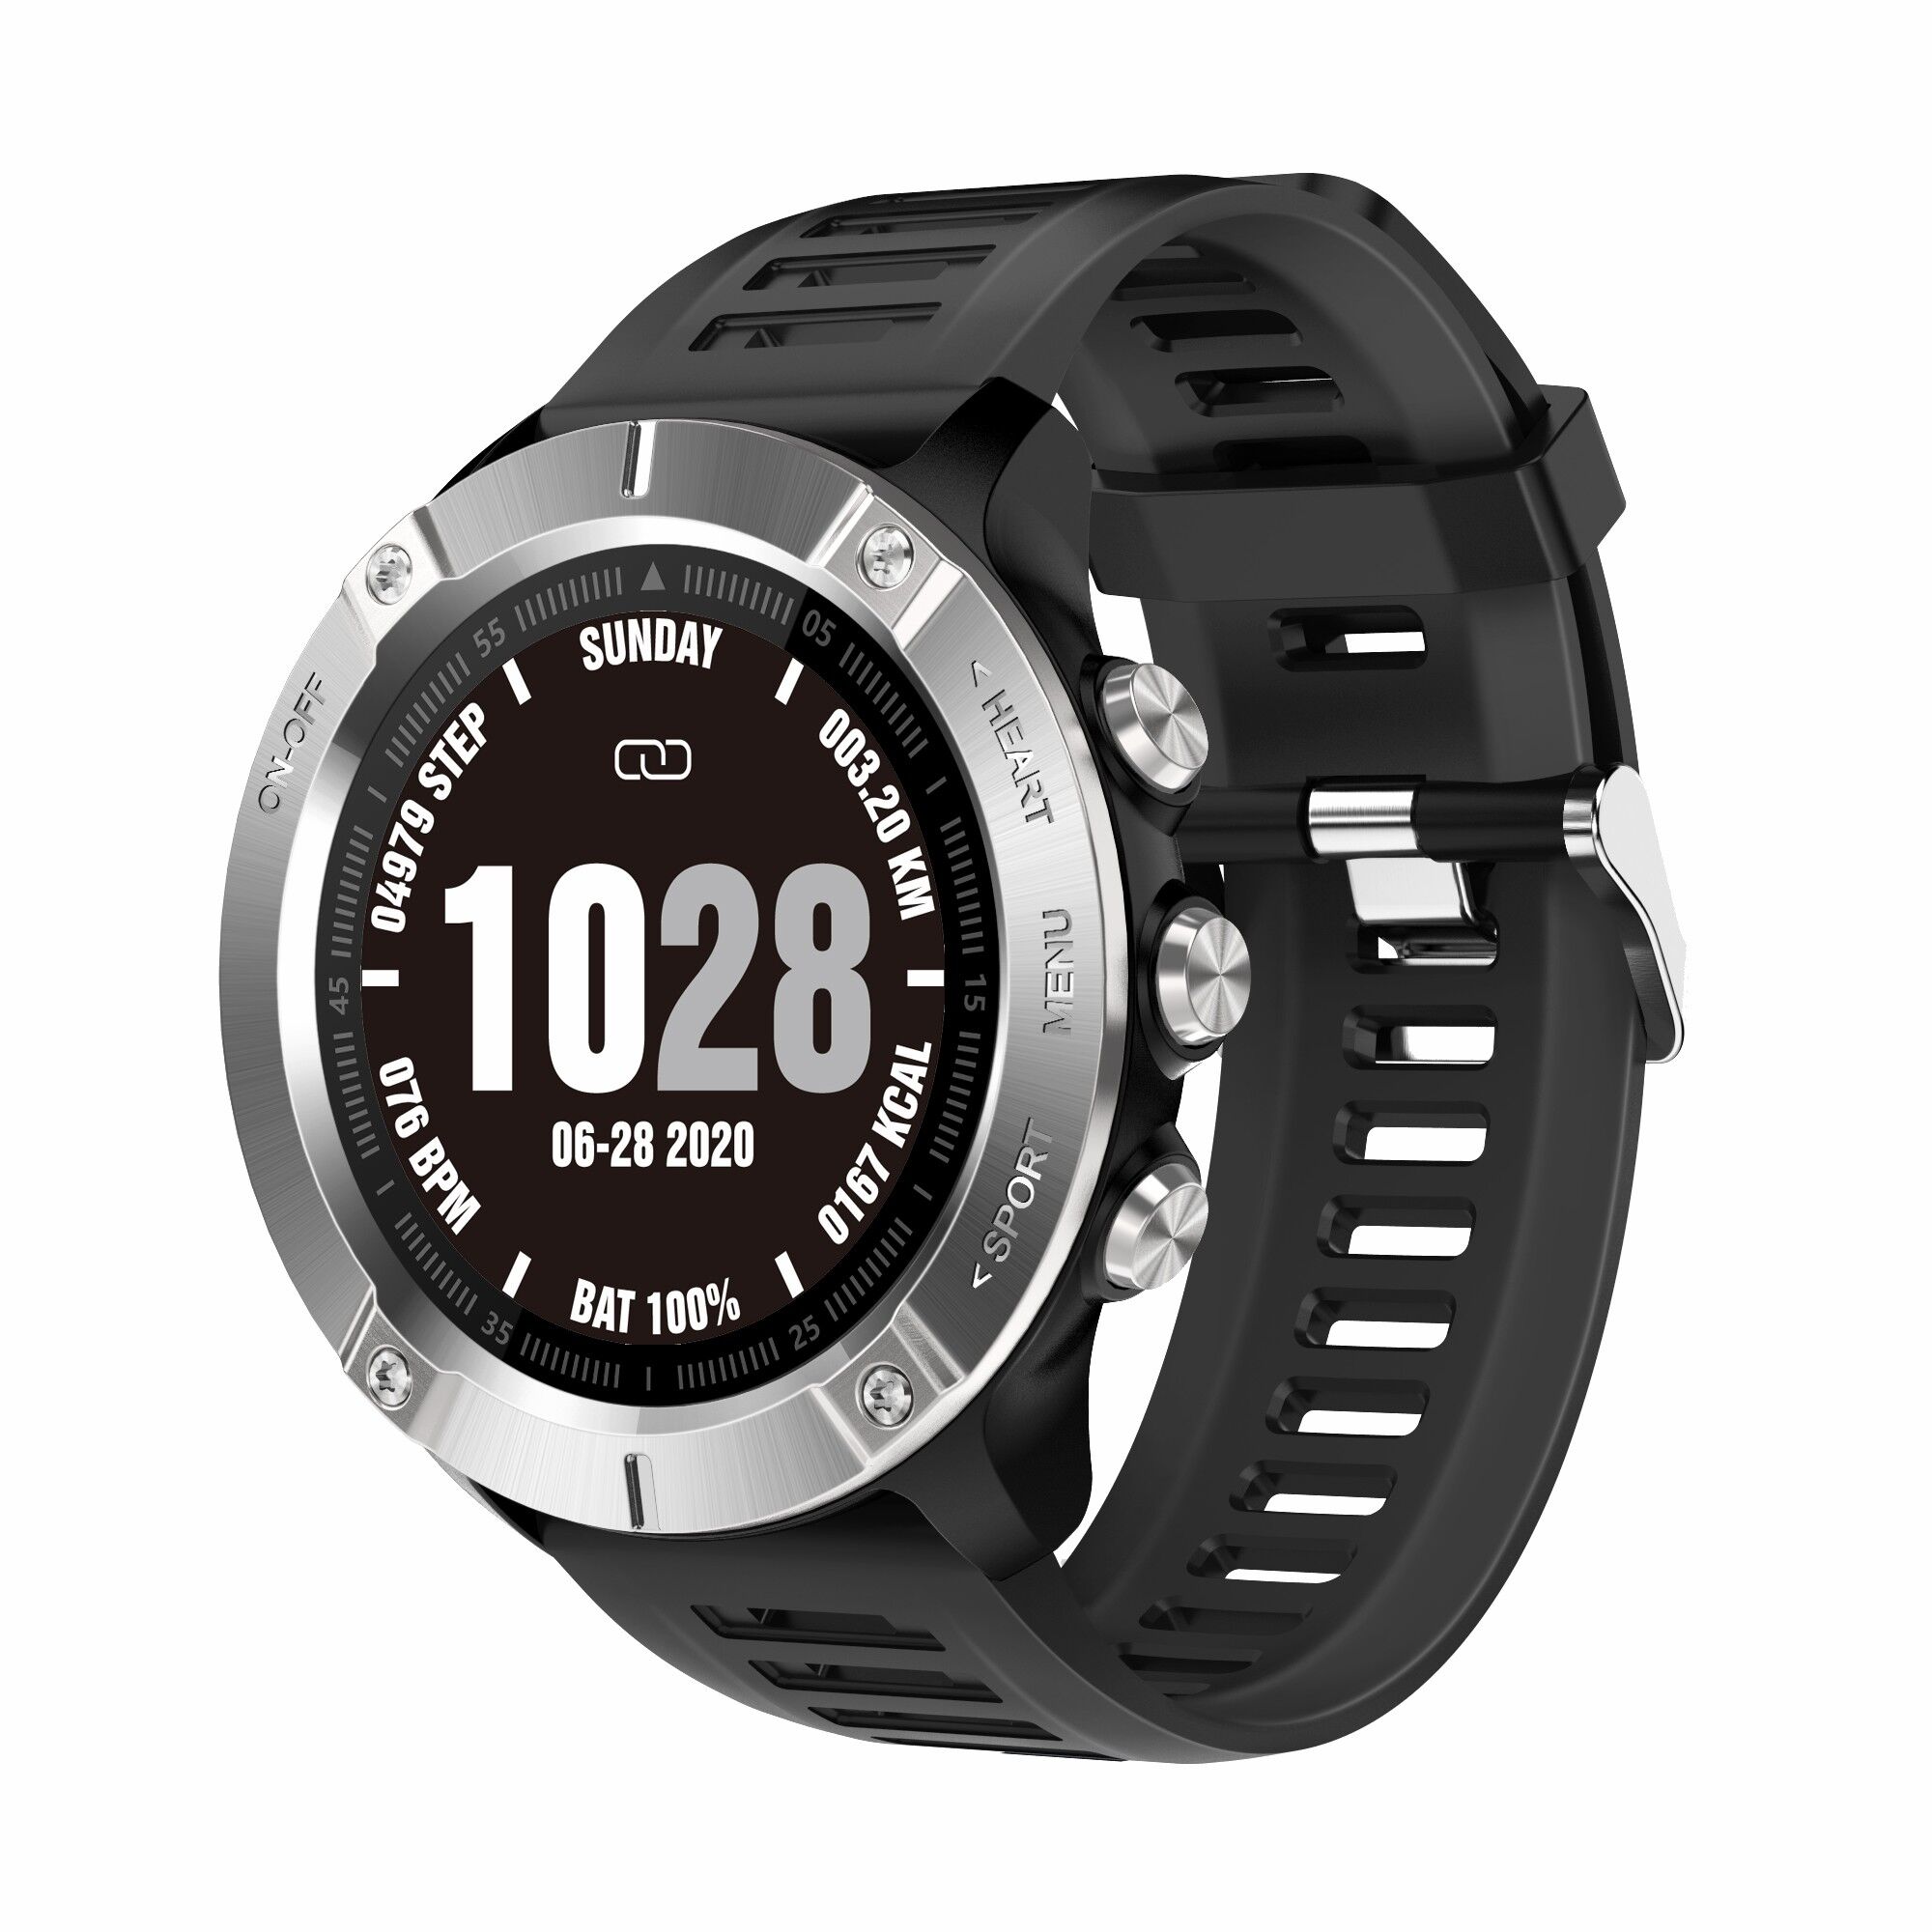 TVC-Mall US LOKMAT ZEUS Waterproof Sports Outdoor Smart Watch with Heart Rate Health Monitor Function - Silver